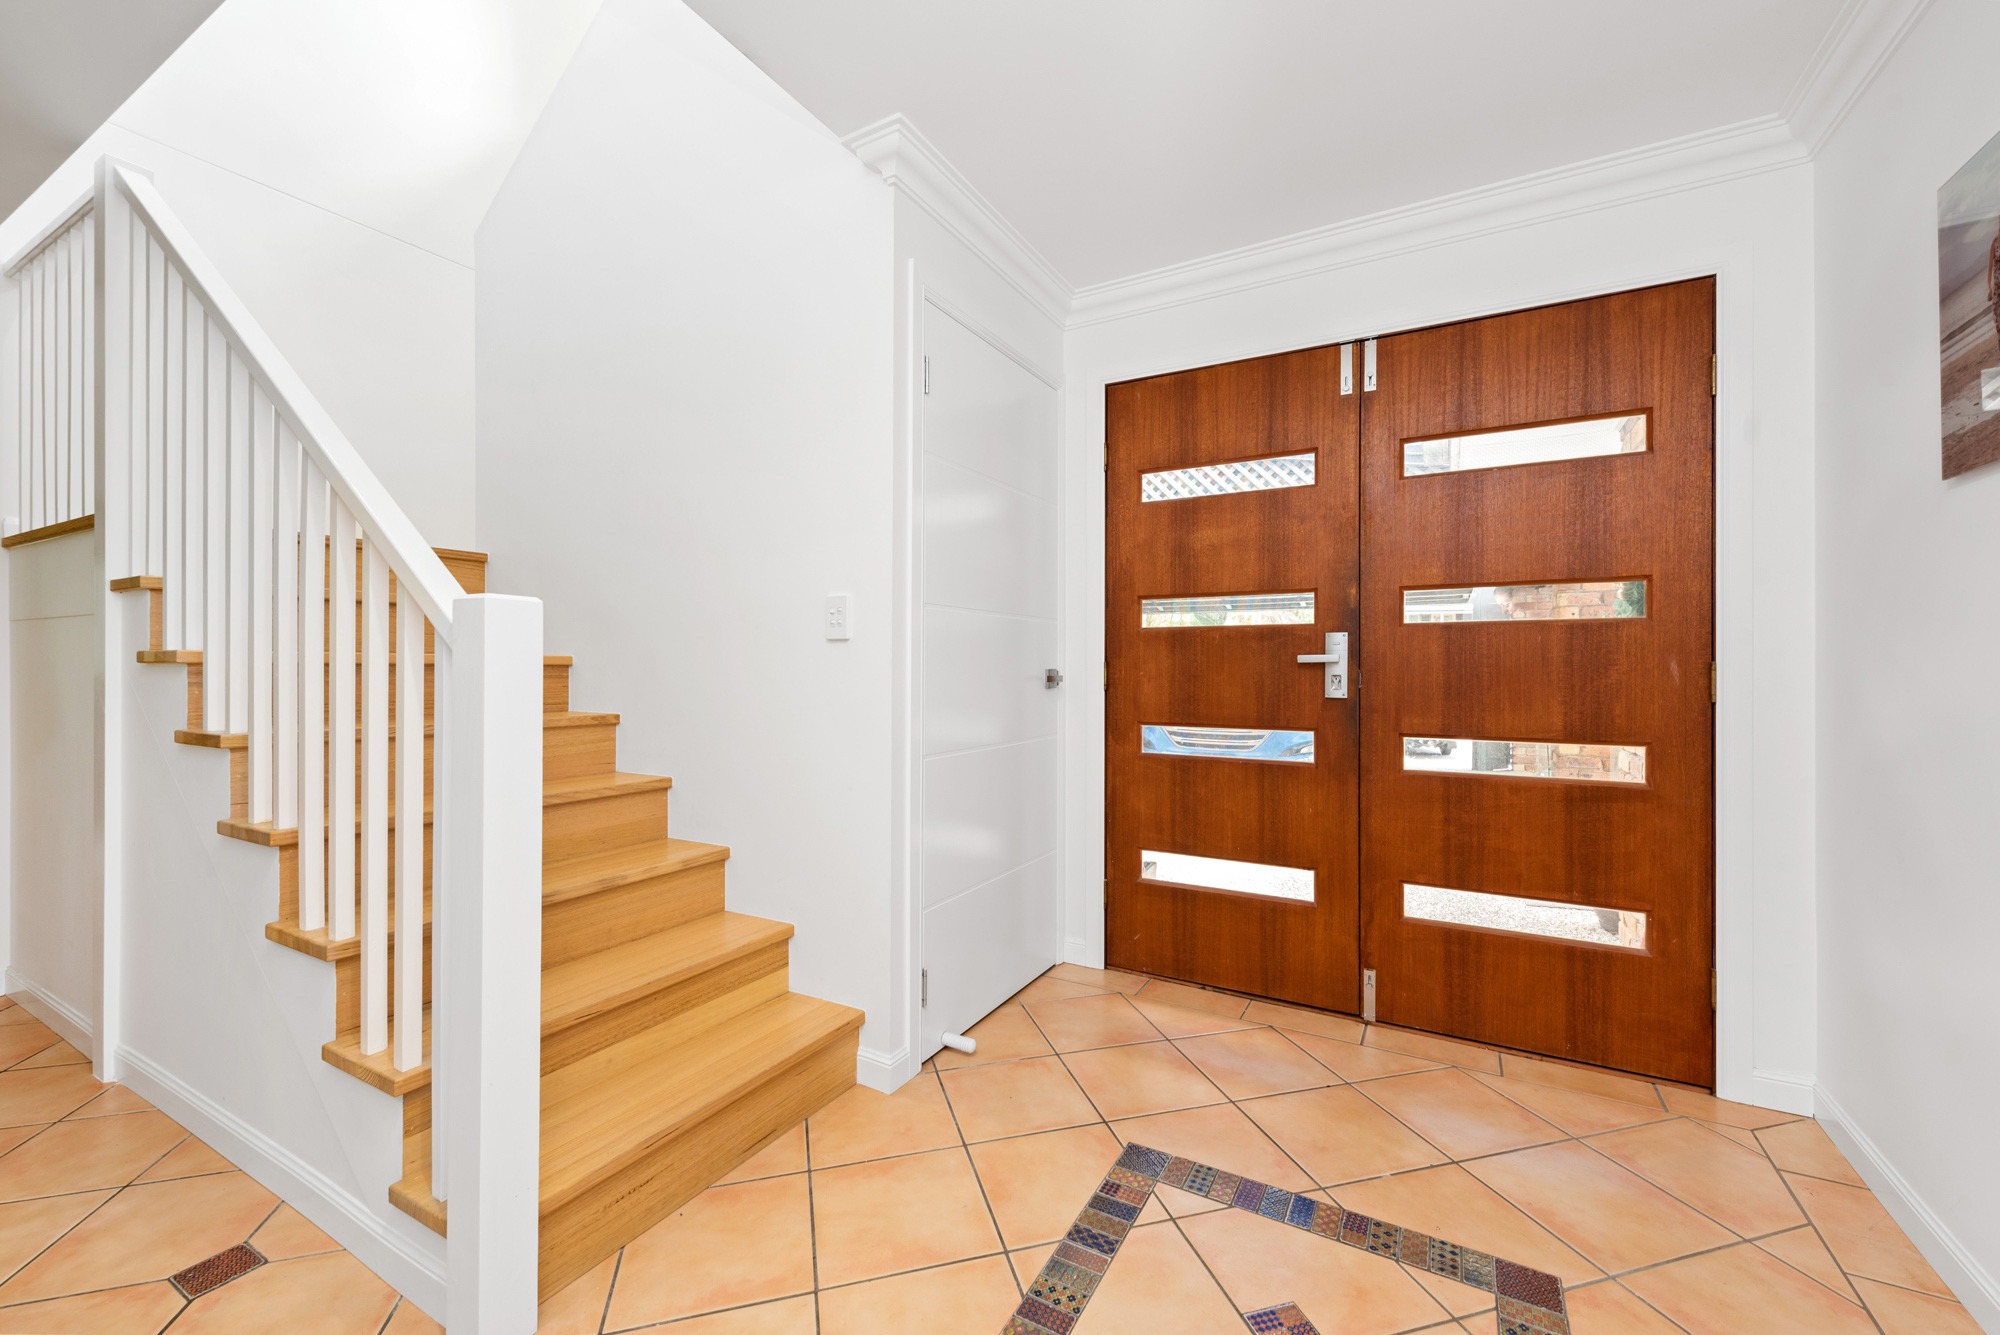 New Victorian Ash hardwood internal stairs with Painted white square vertical balustrades adjoining hardwood front entry doors